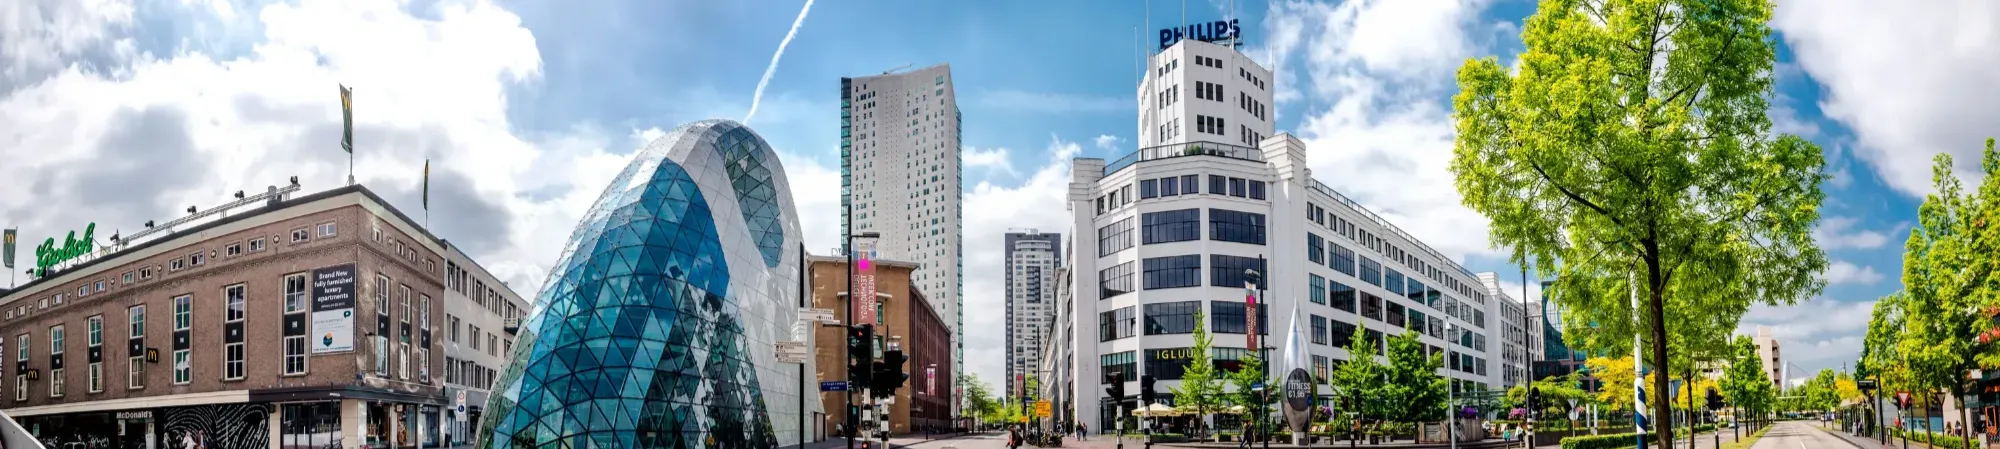 Eindhoven City and Philips building